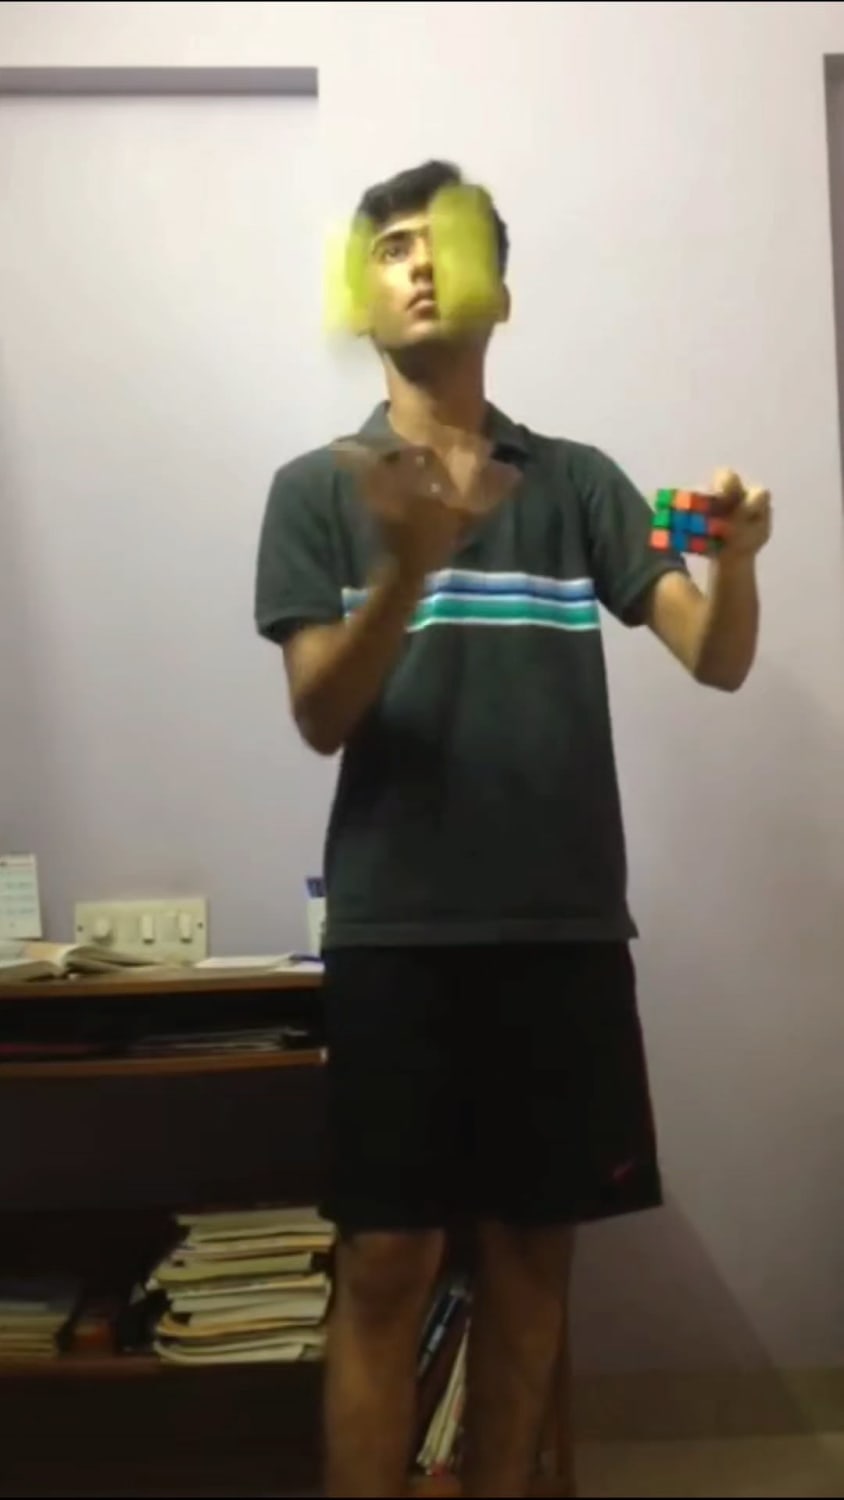 Myself solving a Rubik's Cube while juggling two balls simultaneously :)